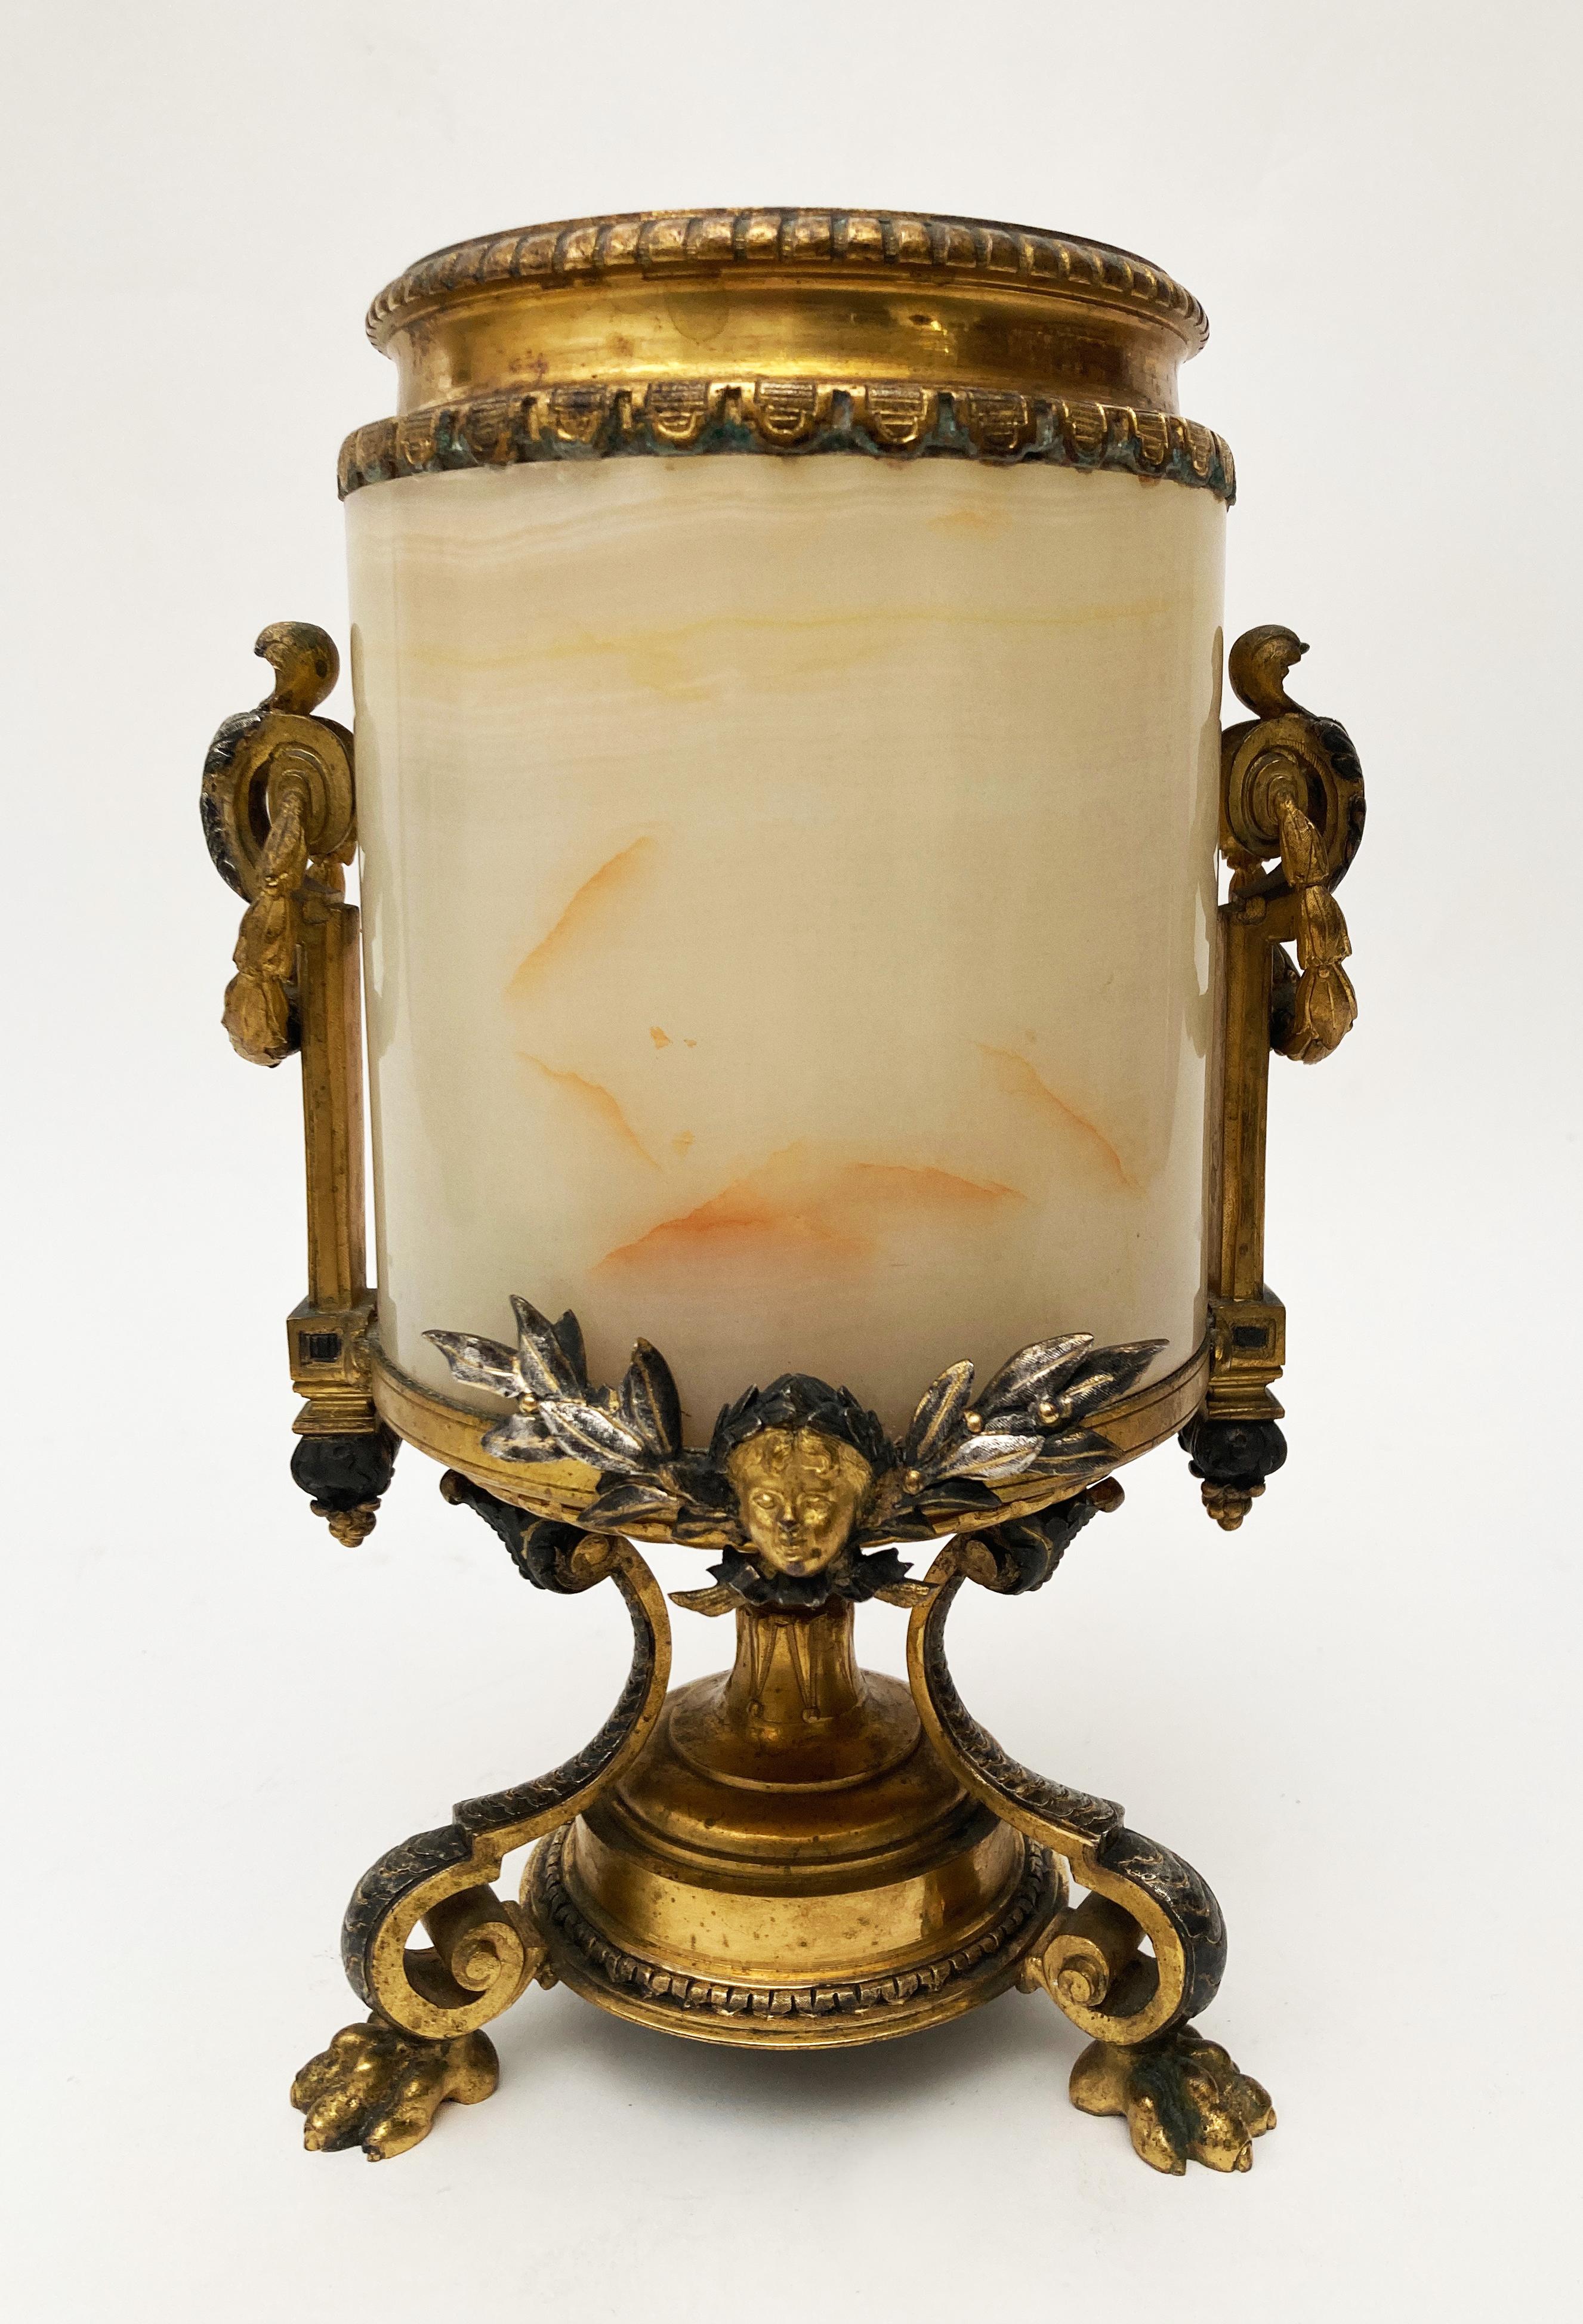 Empire Mid 19th c. Early French Silvered & Dore Bronze With Honey Alabaster Vase For Sale